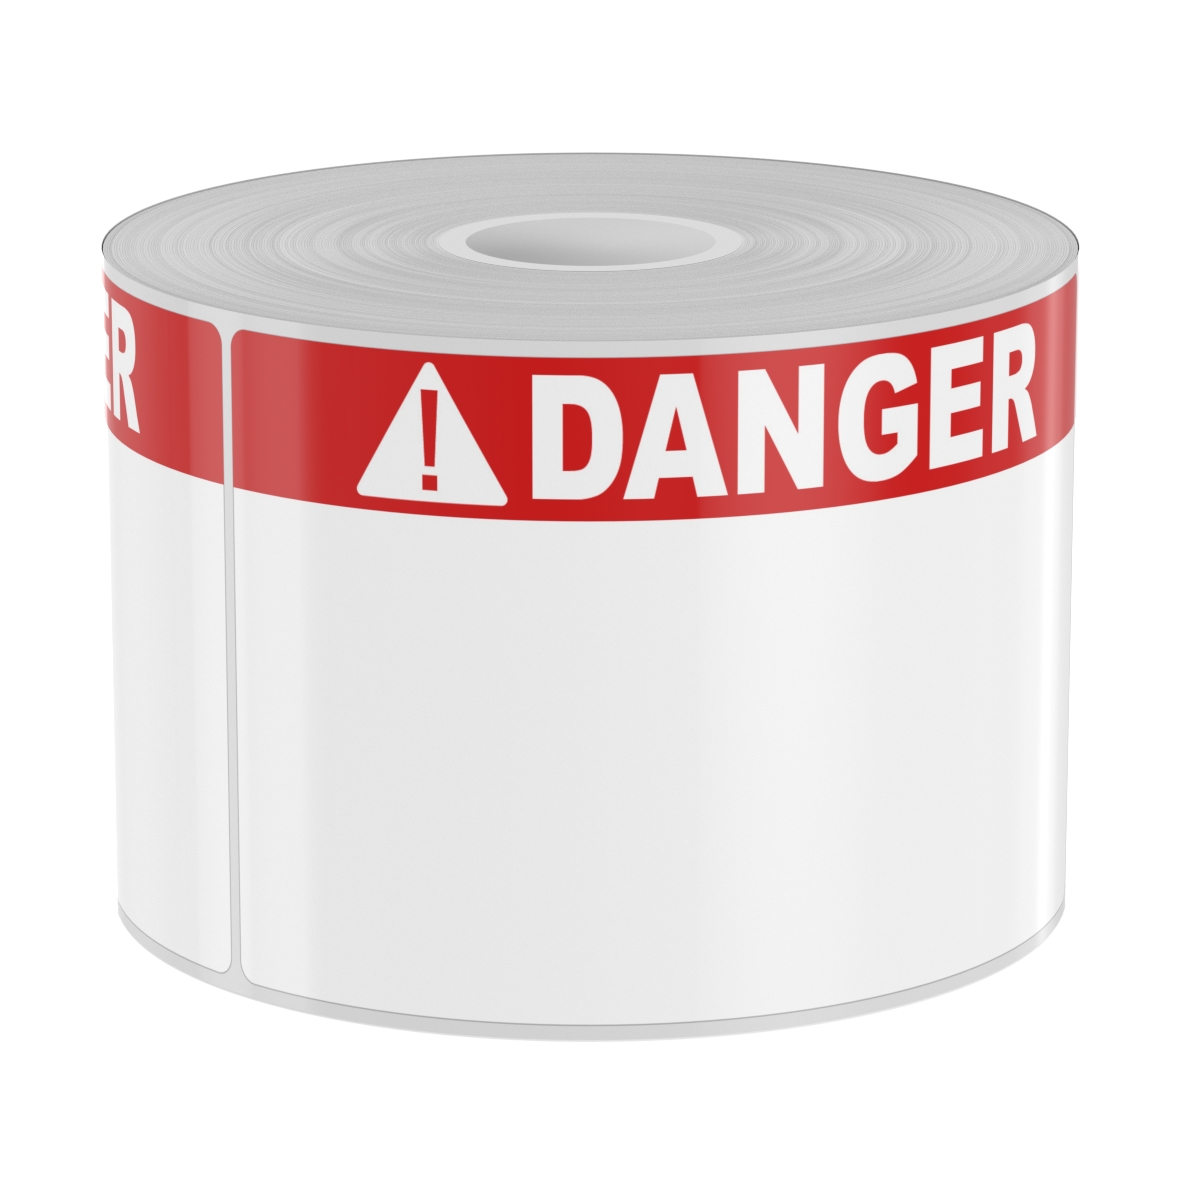 Ask a question about 250 3" x 5" High-Performance Die-Cut Red Band Danger